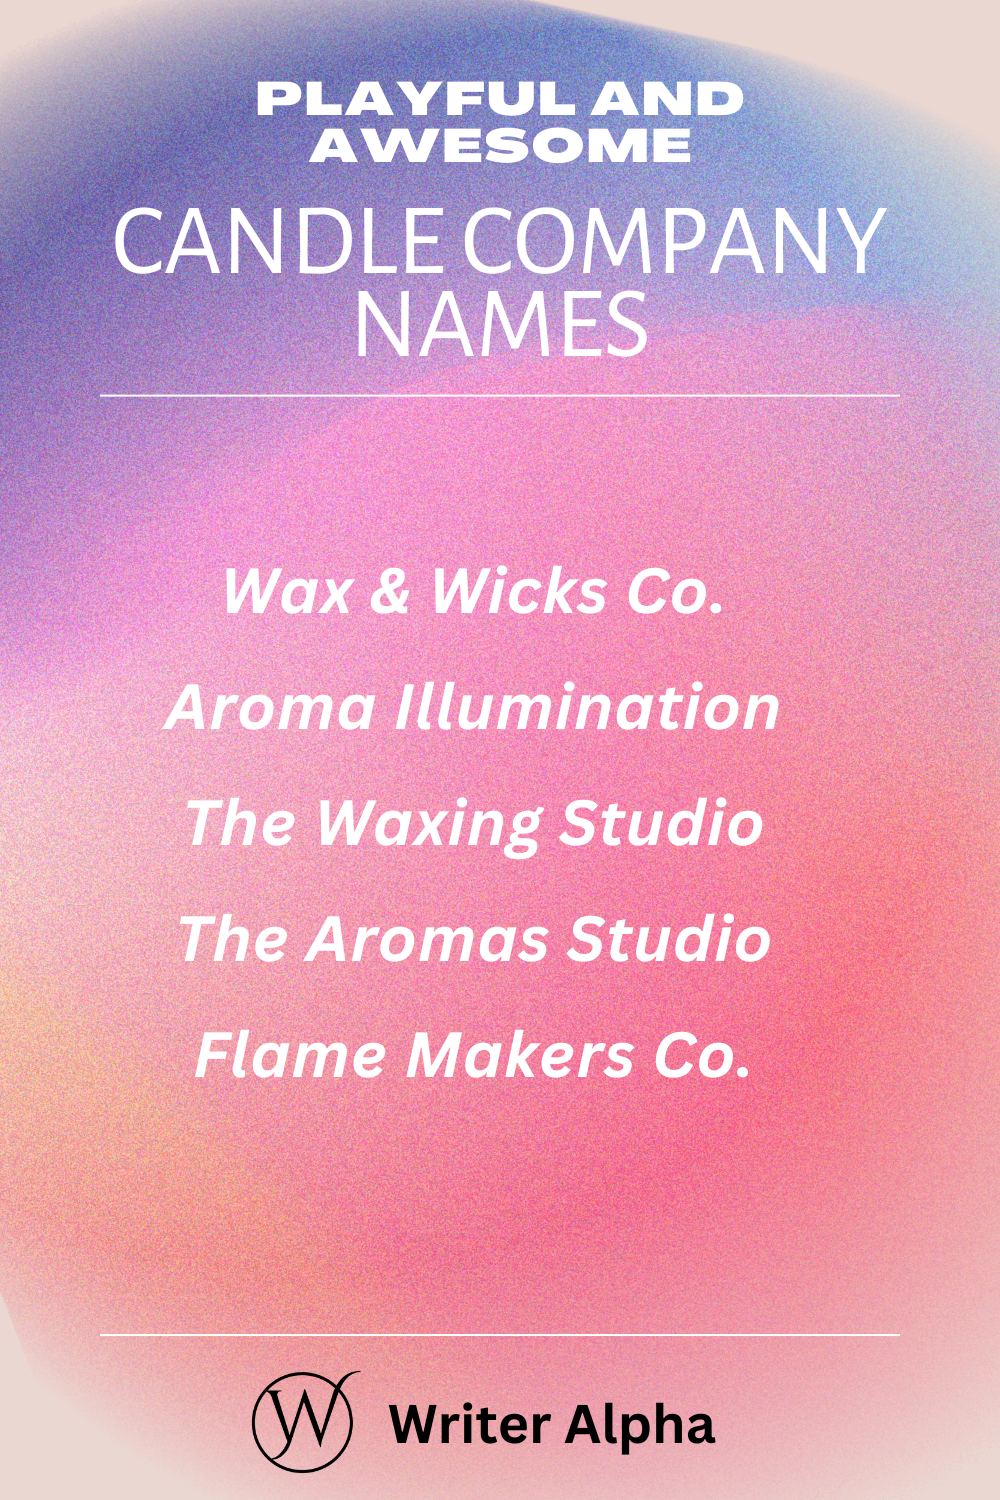 Ideal Candle Business Names